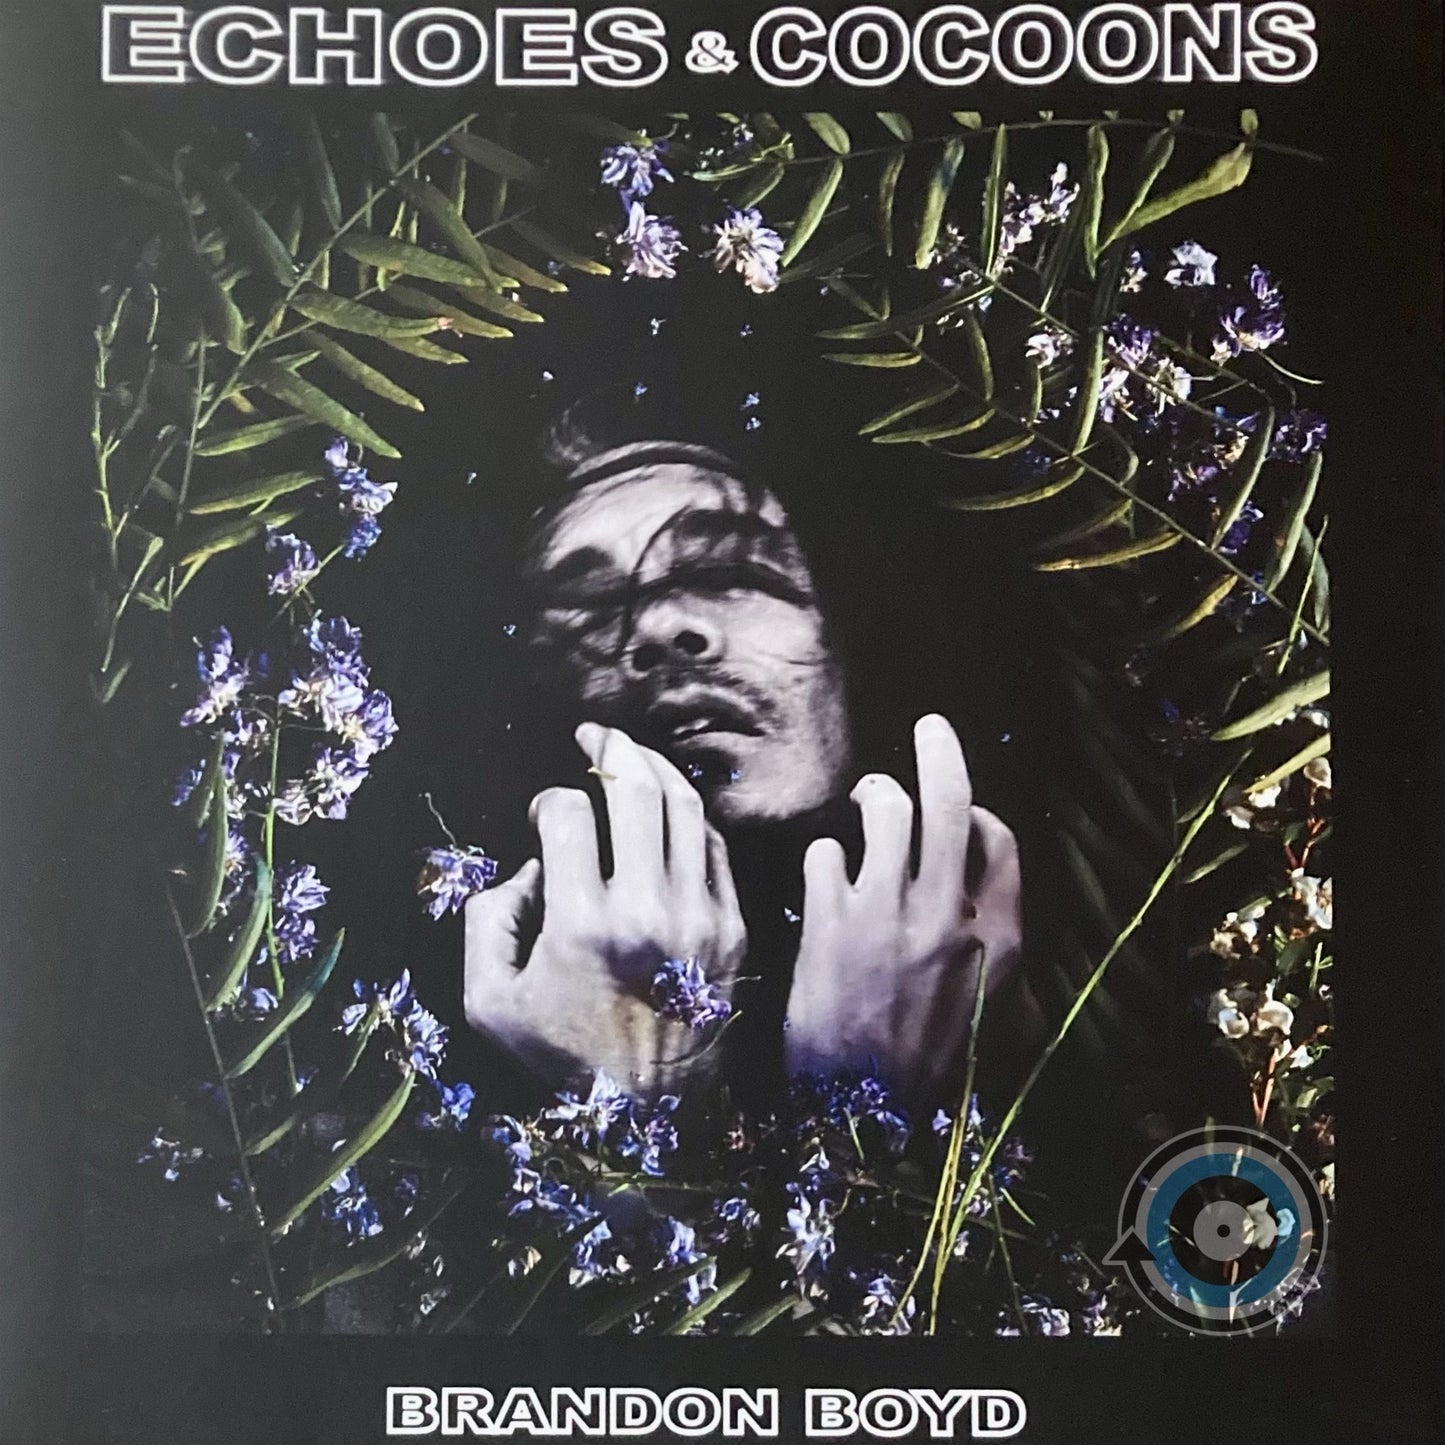 Brandon Boyd – Echoes & Cocoons LP (Limited Edition)